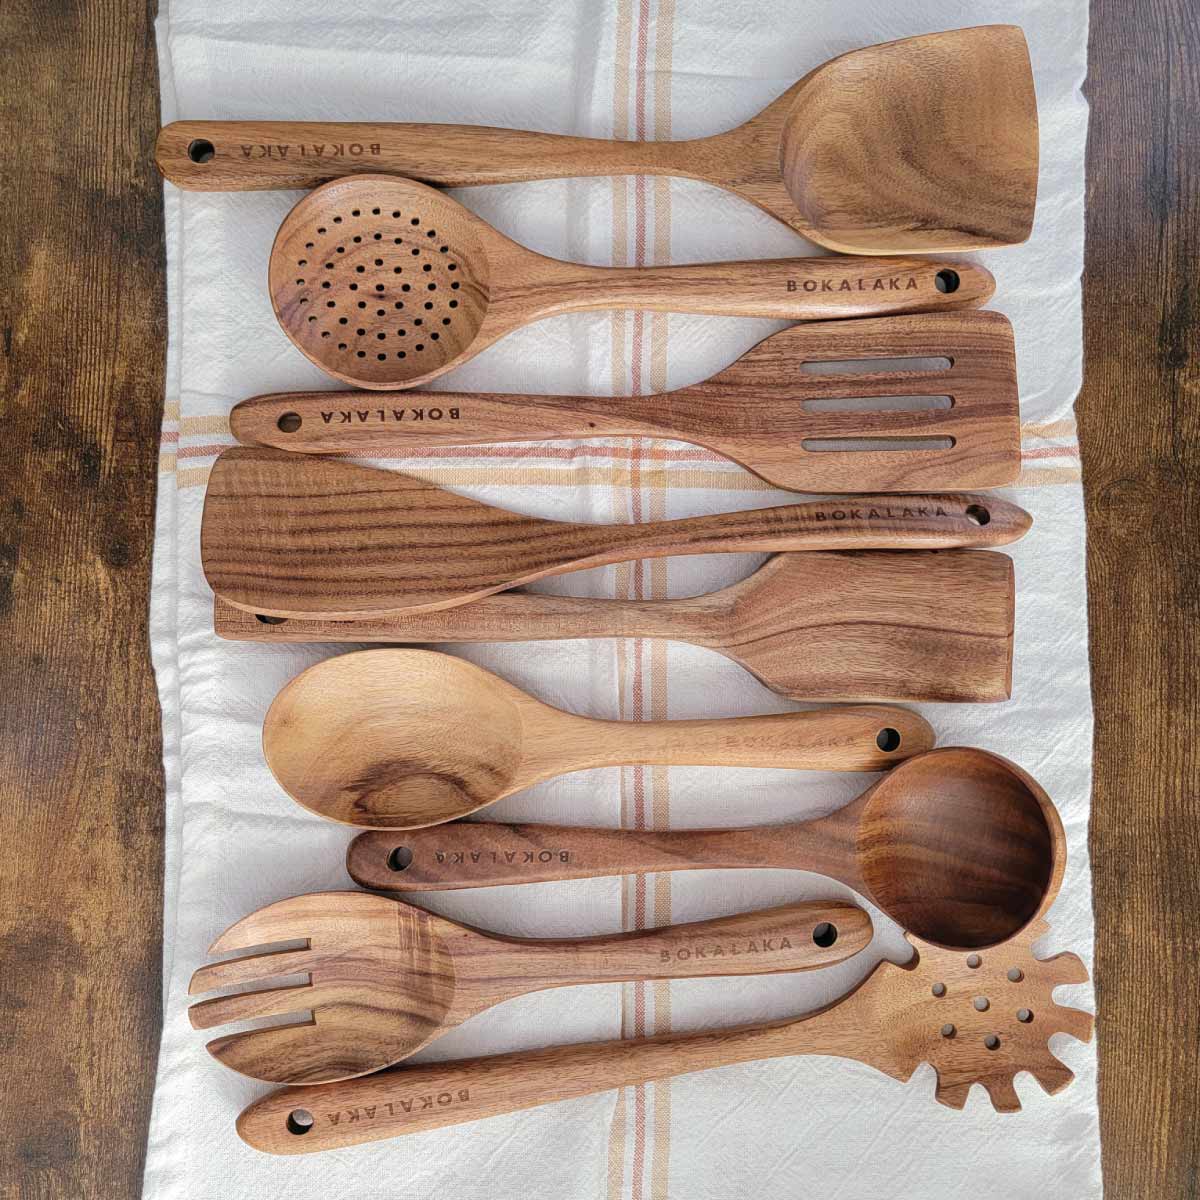 Set of 9 wooden serving utensils from spatulas and spoons to ladles and a spaghetti server.